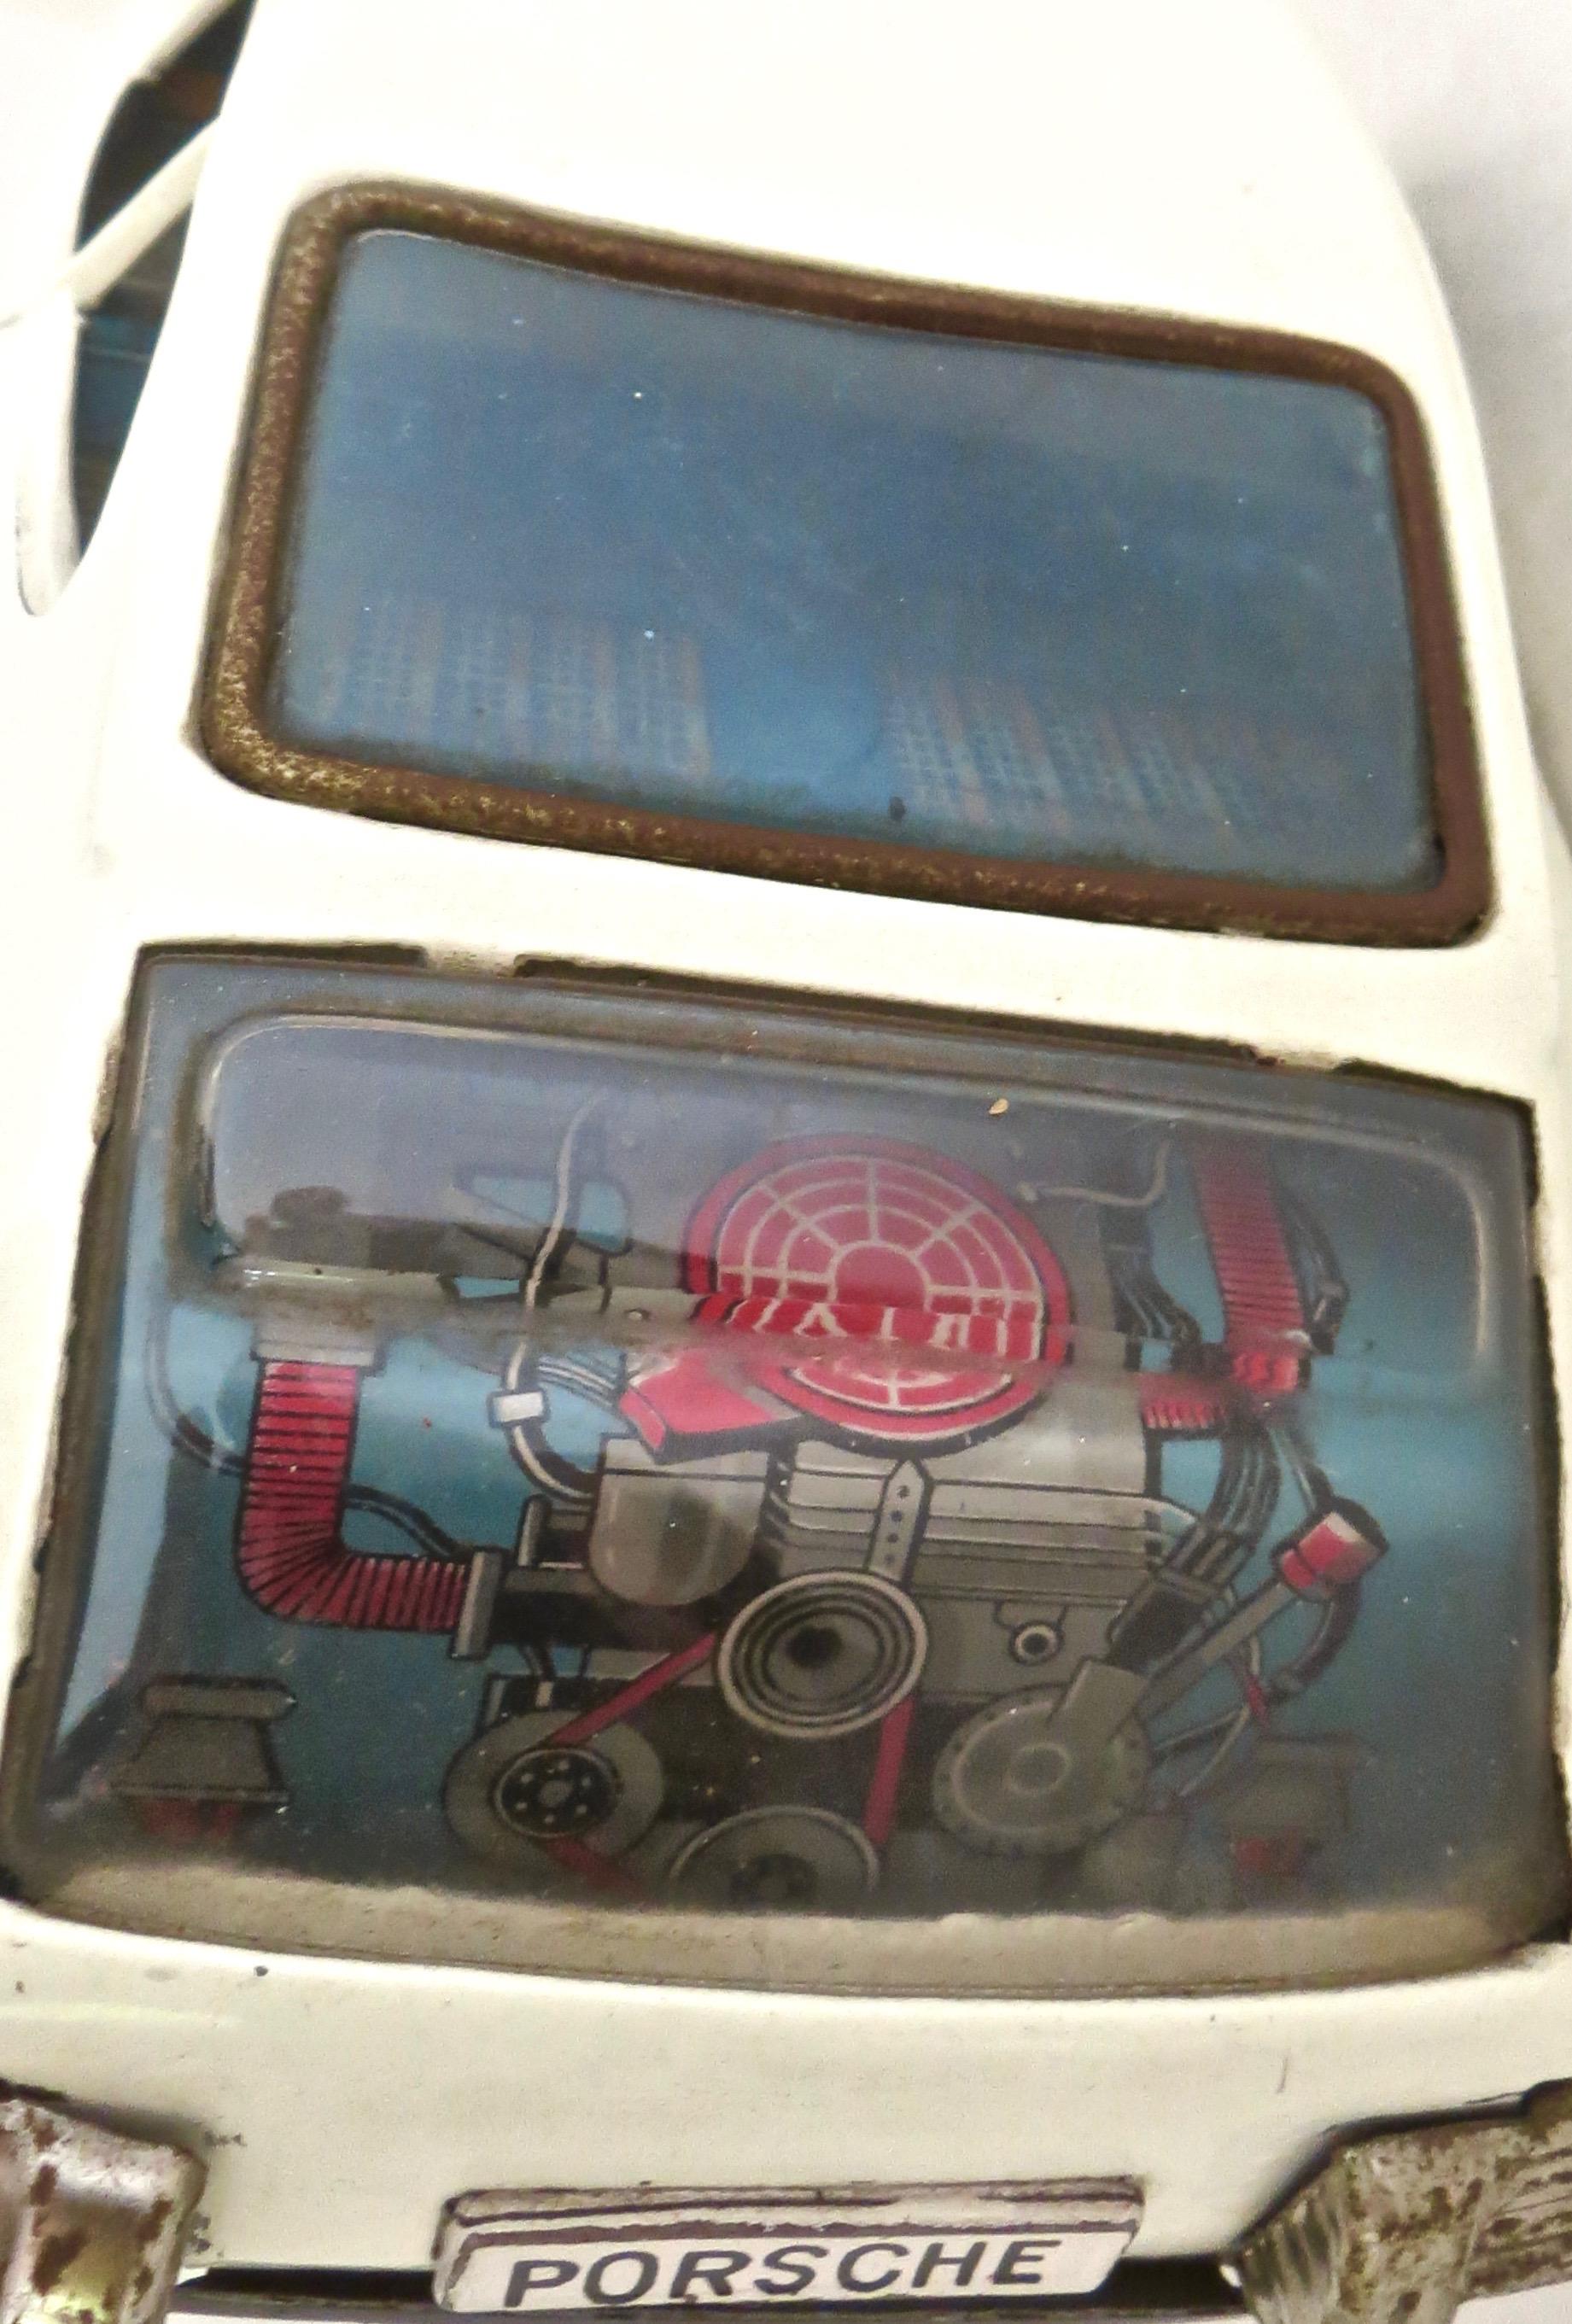 Folk Art Rare 911 Porsche Friction Tin Toy by Bandai Toy Co. Made in Japan Circa 1960's For Sale